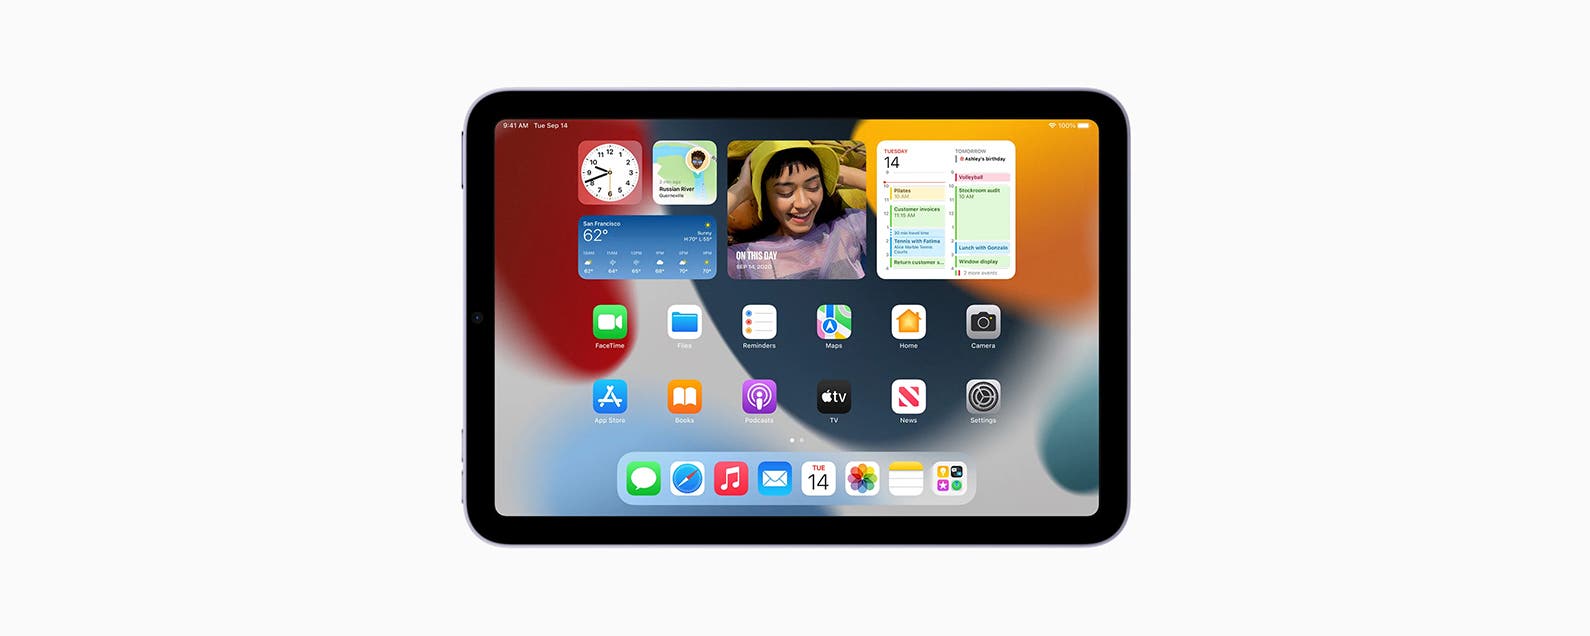 What to expect amid the bevy of conflicting iPad rumors